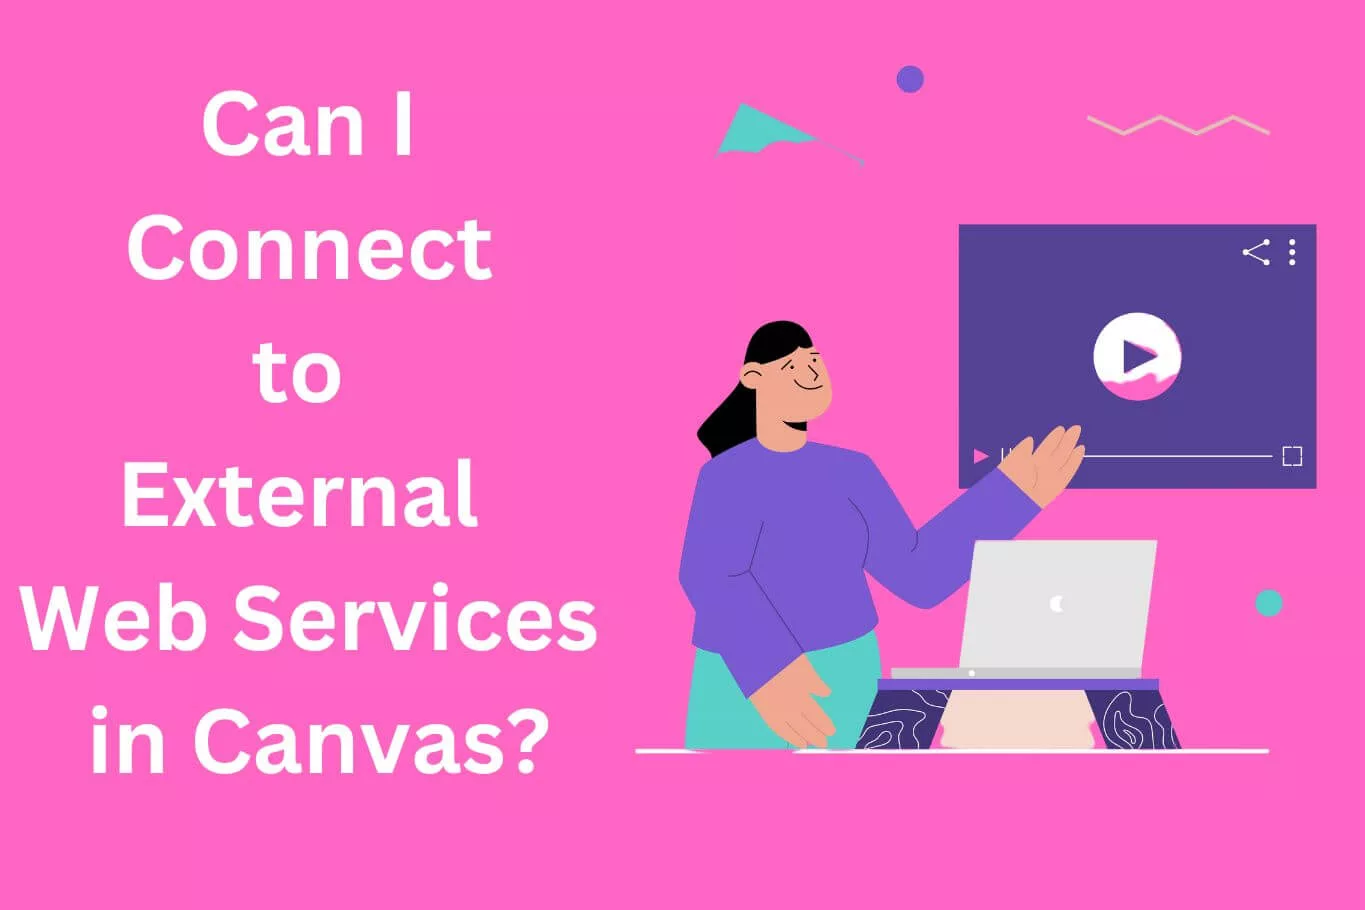 Can I Connect to External Web Services in Canvas?